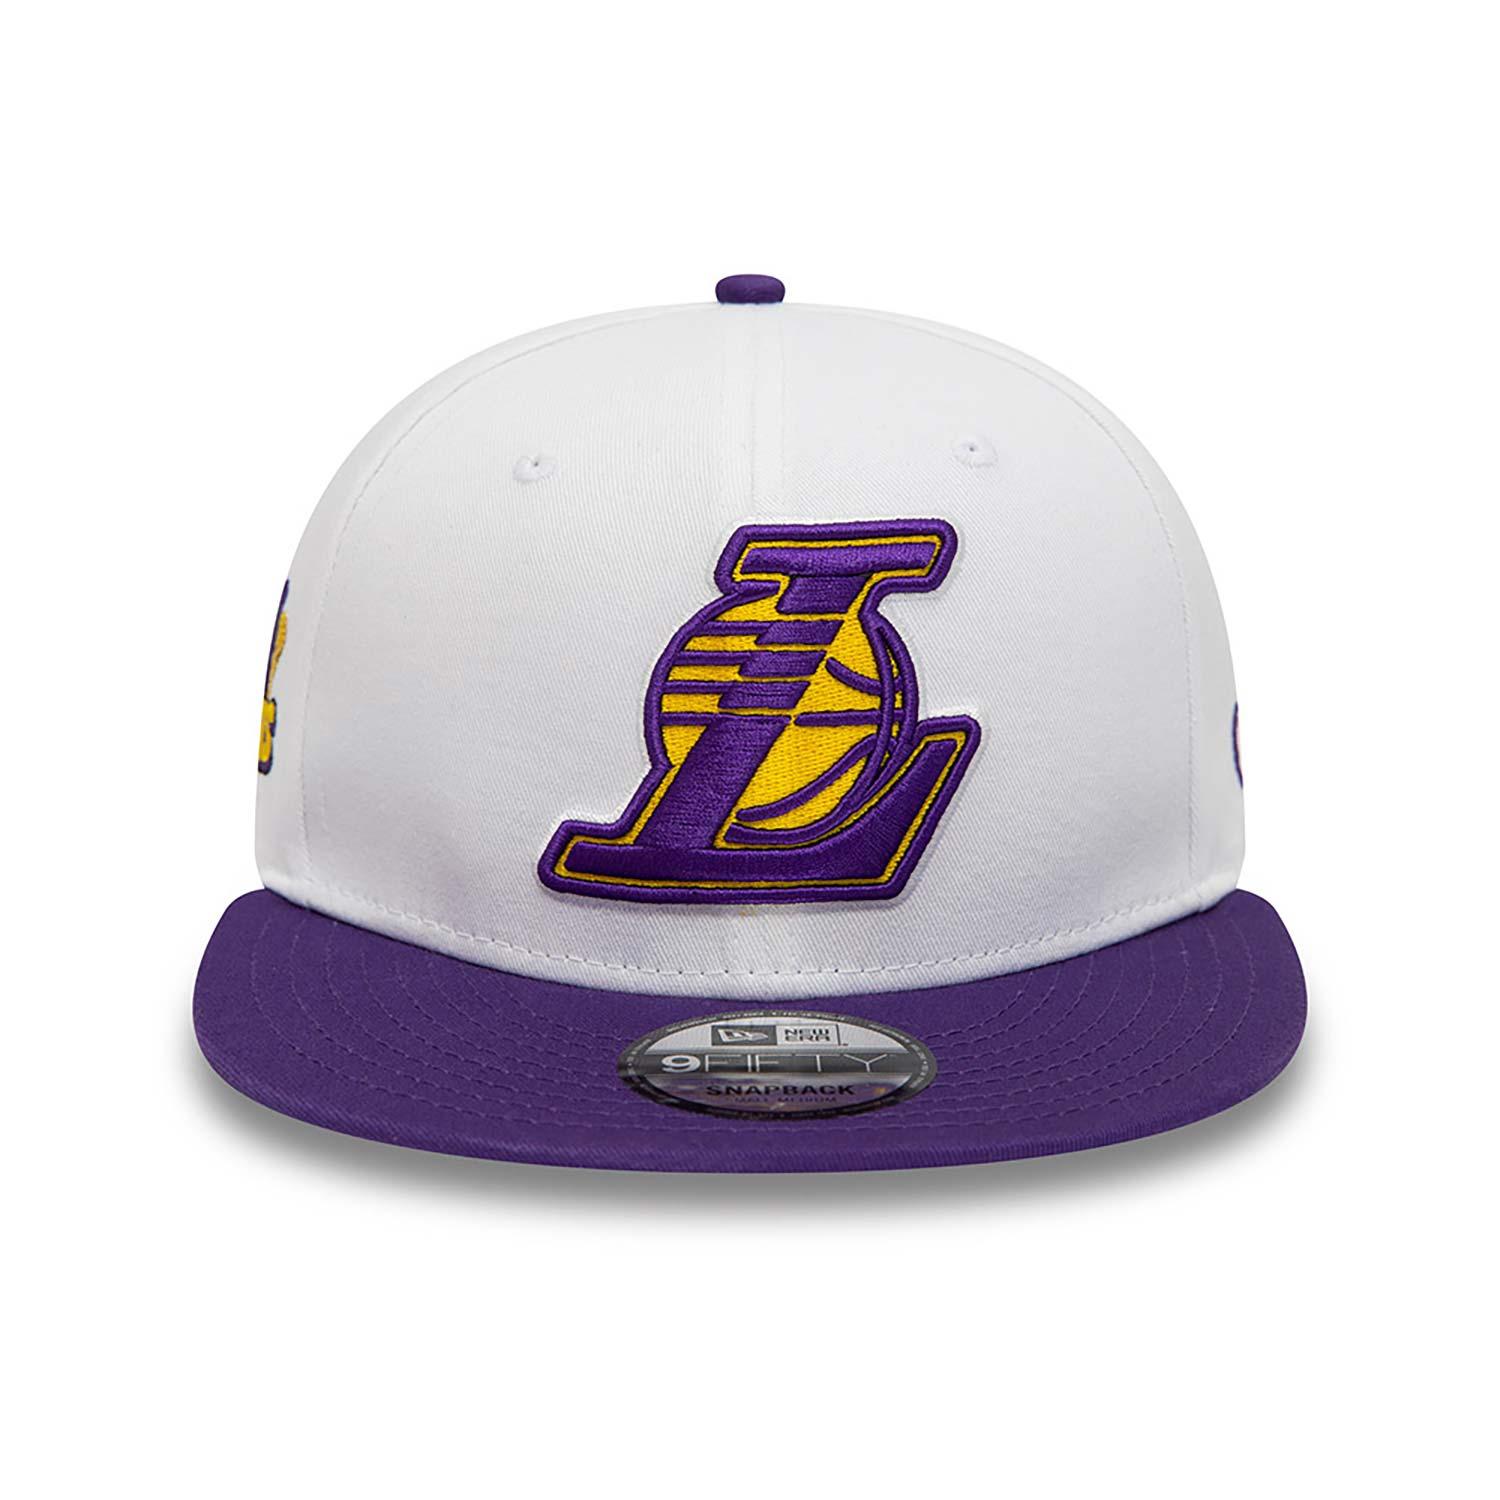 New era 60358013 White Crown Team 9Fifty Los Angeles Lakers Cap White